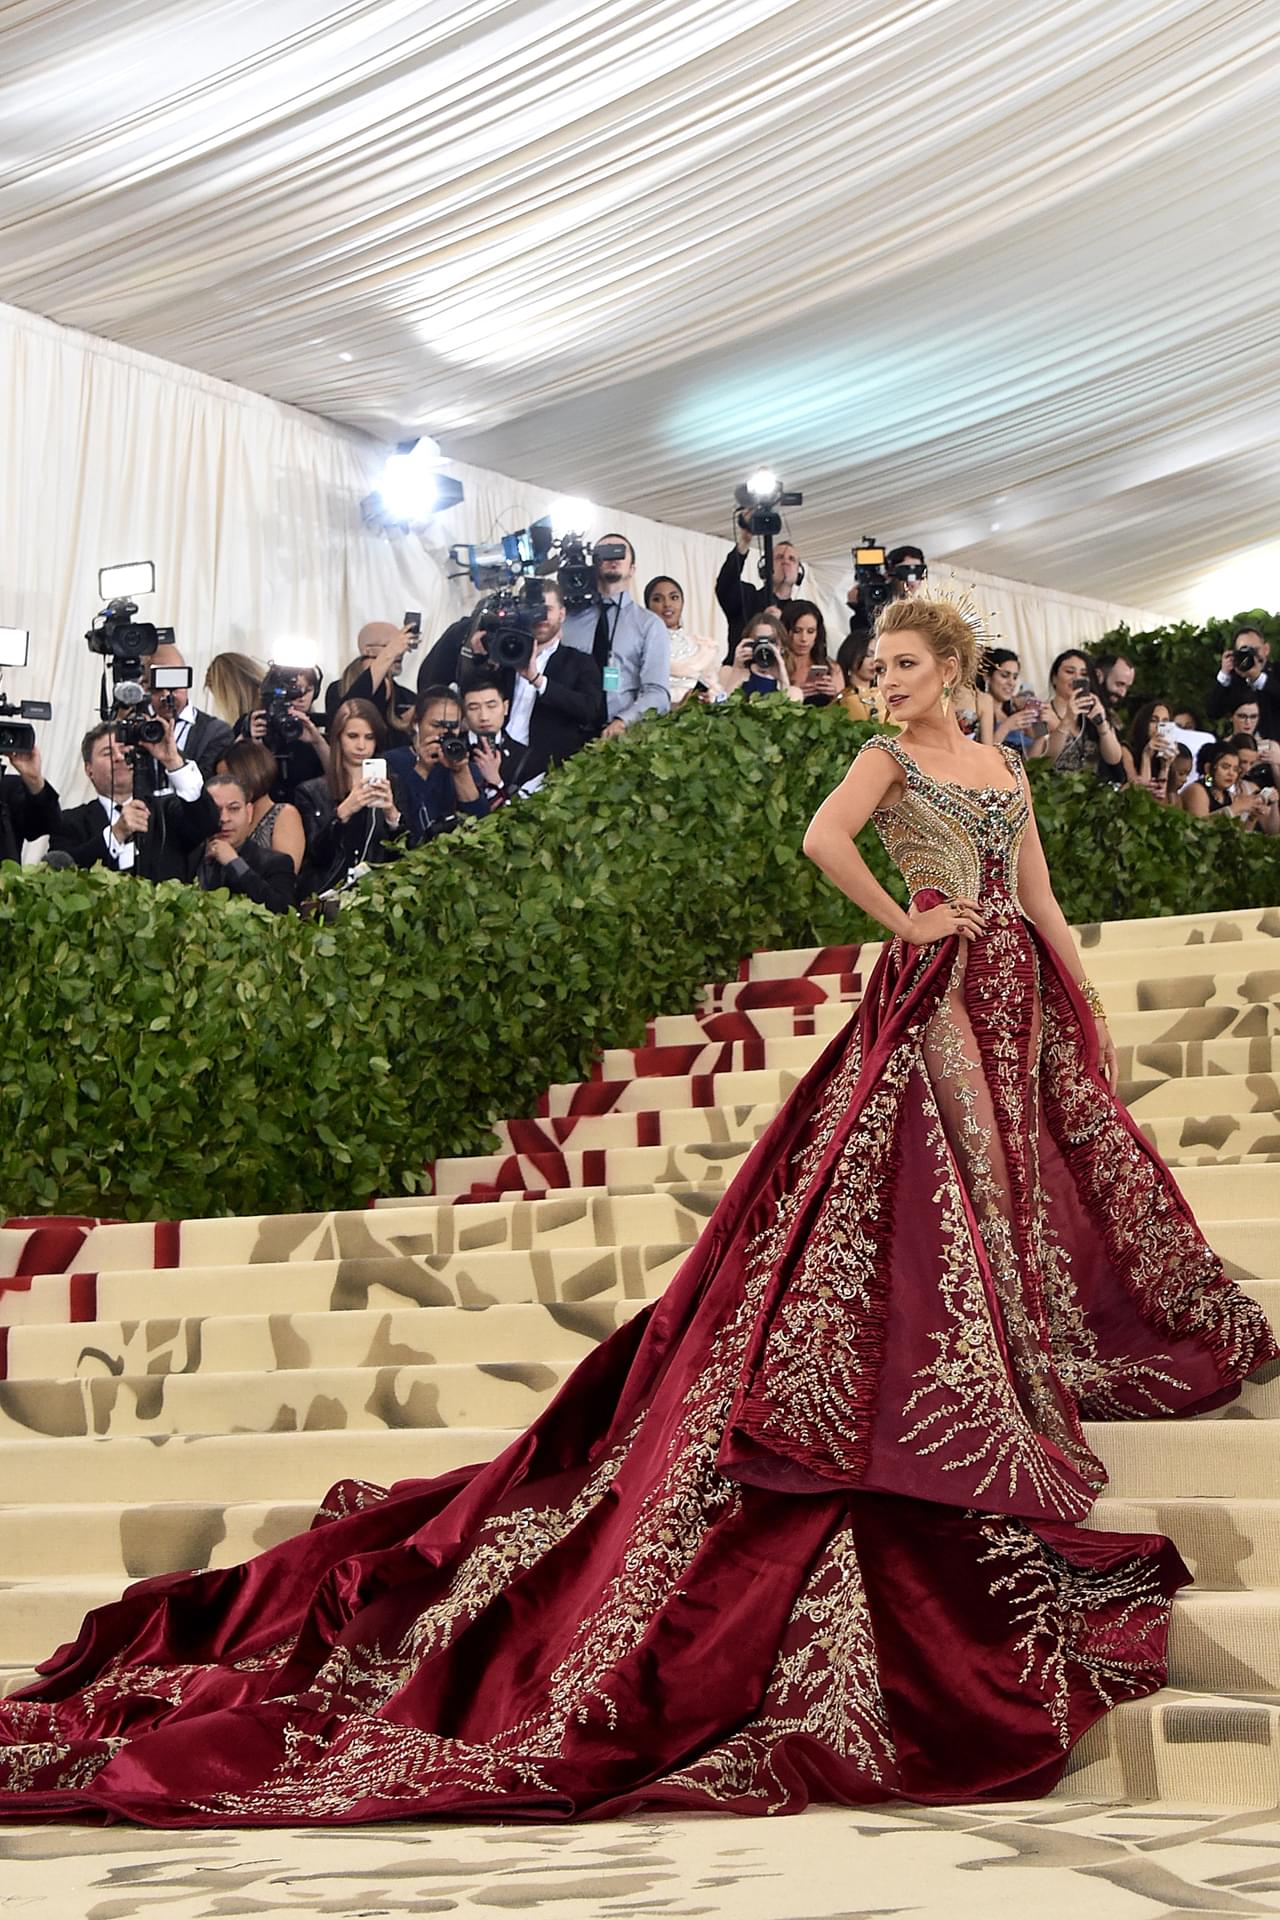 Calling Blake Lively the Queen of Met Gala because she dresses up with the theme every year, and it's great to match the red carpet color!  - Photo 3.